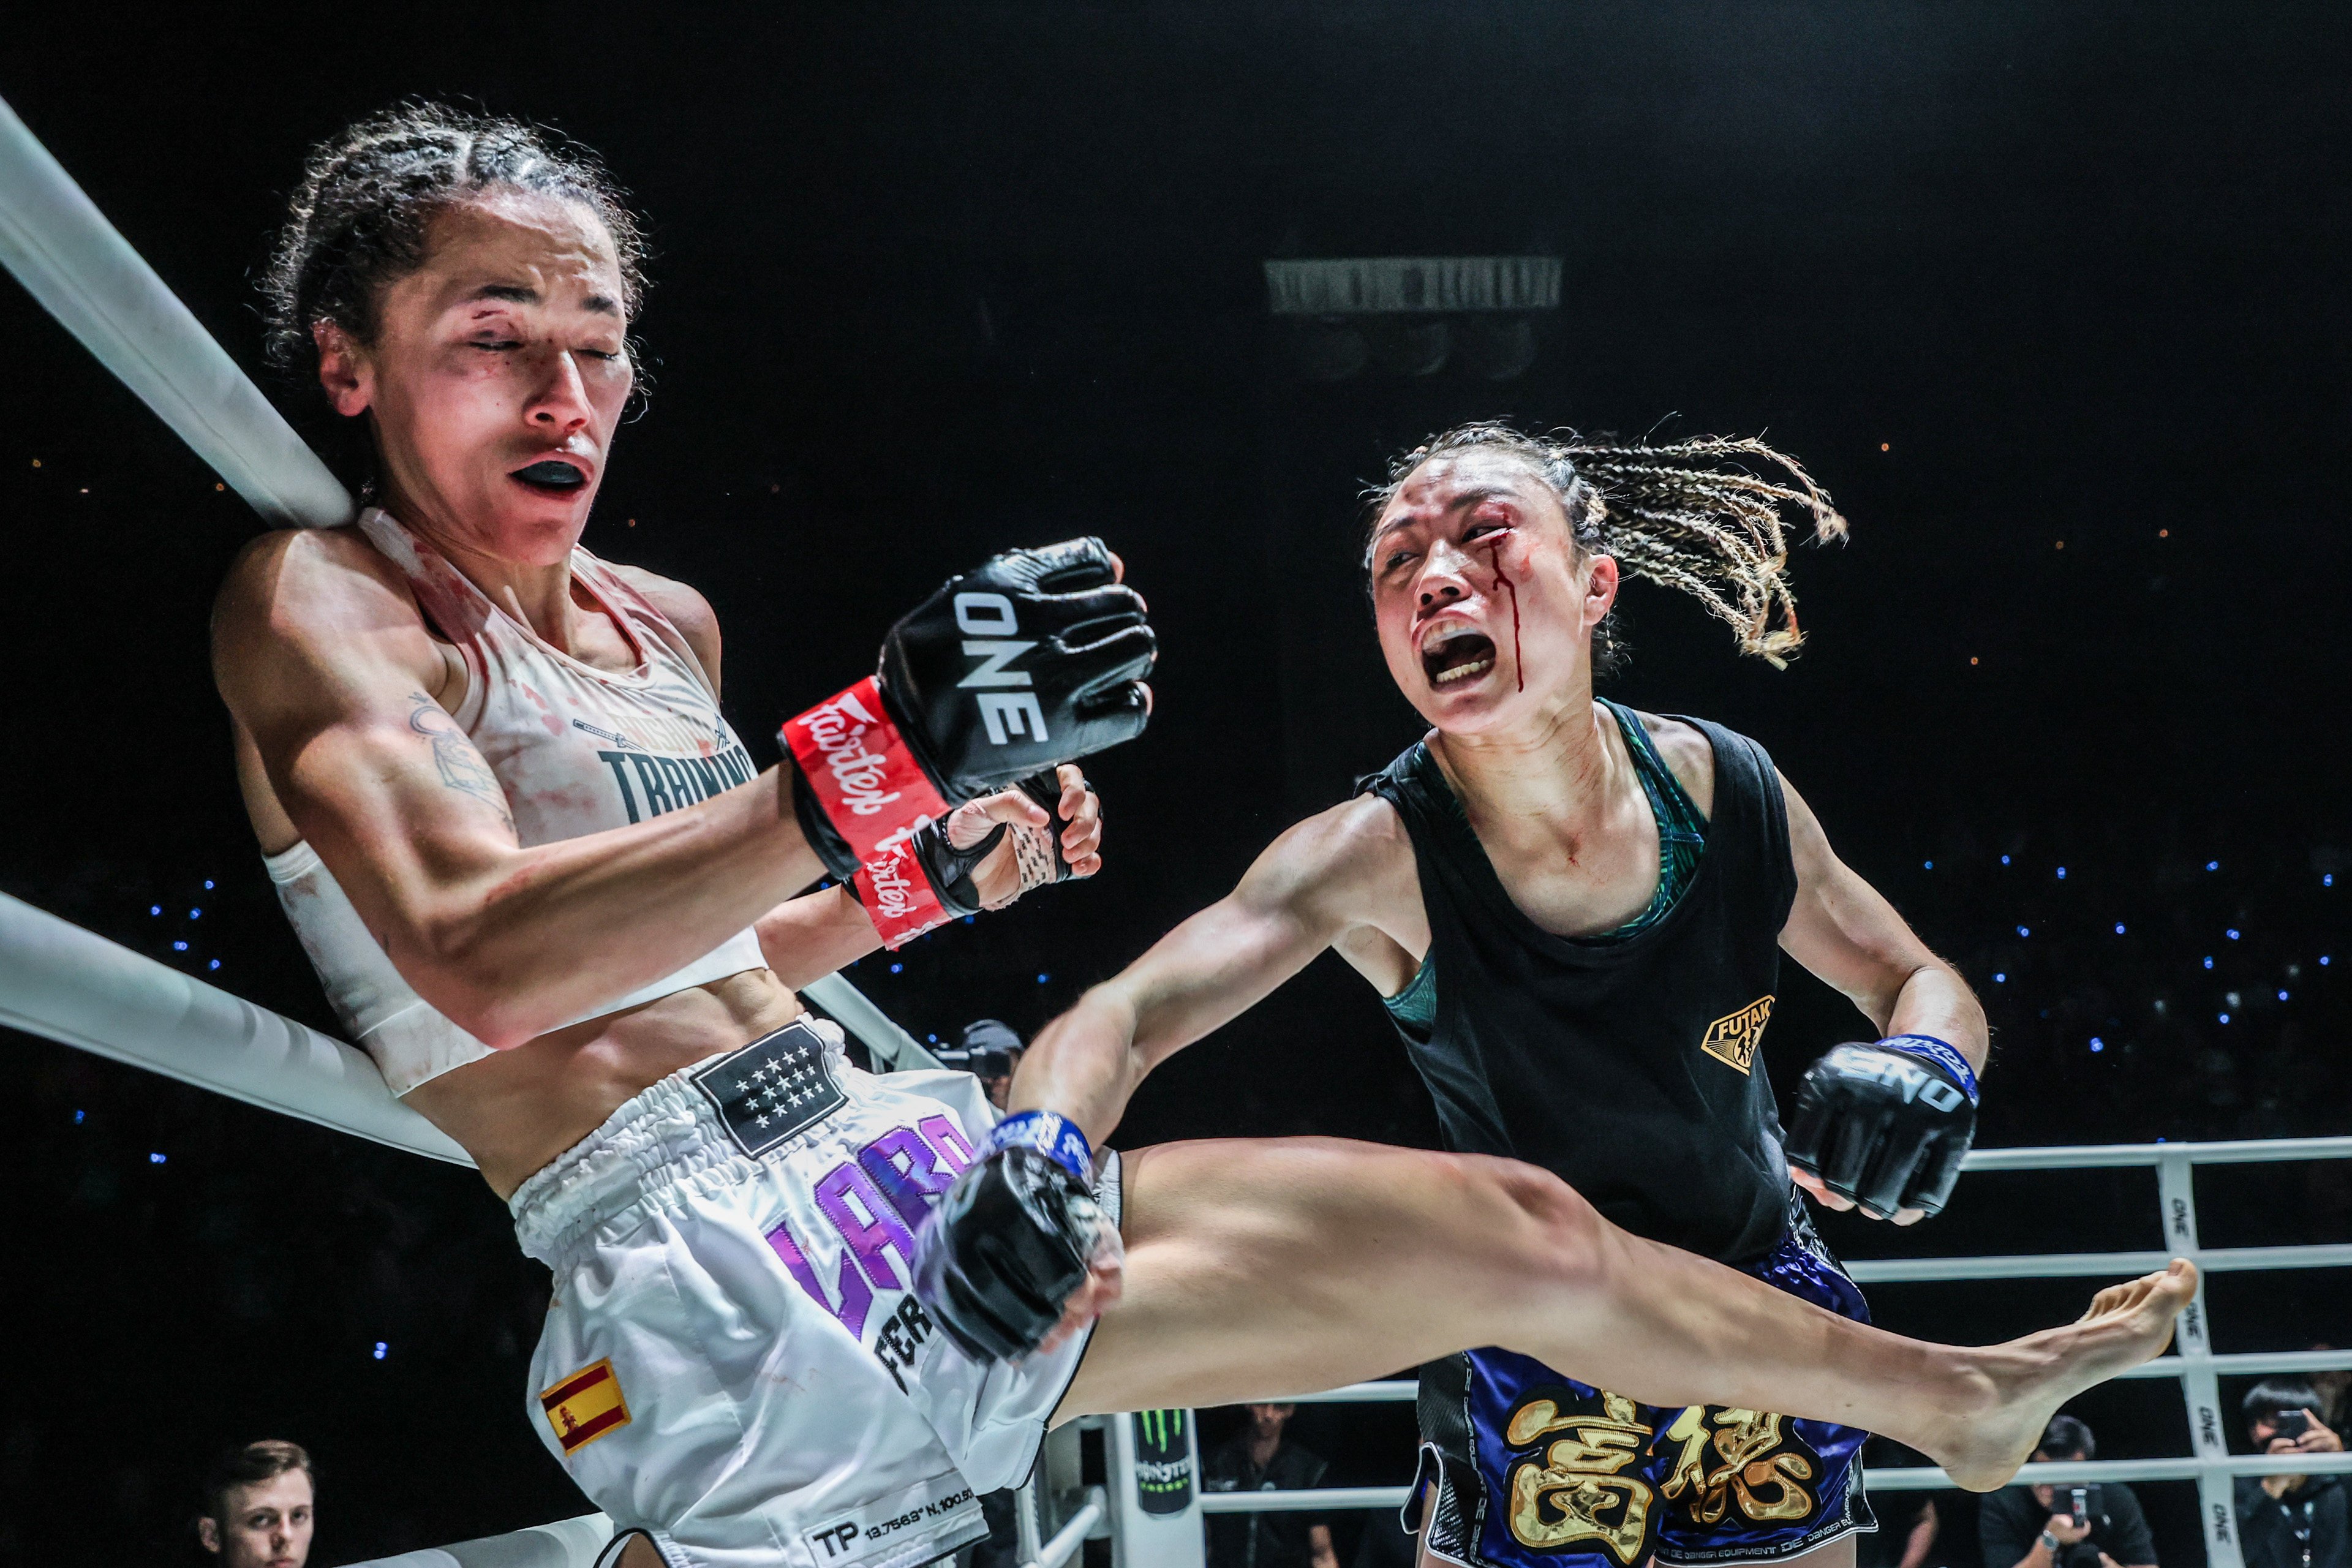 Hong Kong’s Yu Yau-pui connects with a right on Lara Fernandez during their atomweight bout at ONE Fight Night 20. Photo: ONE Championship